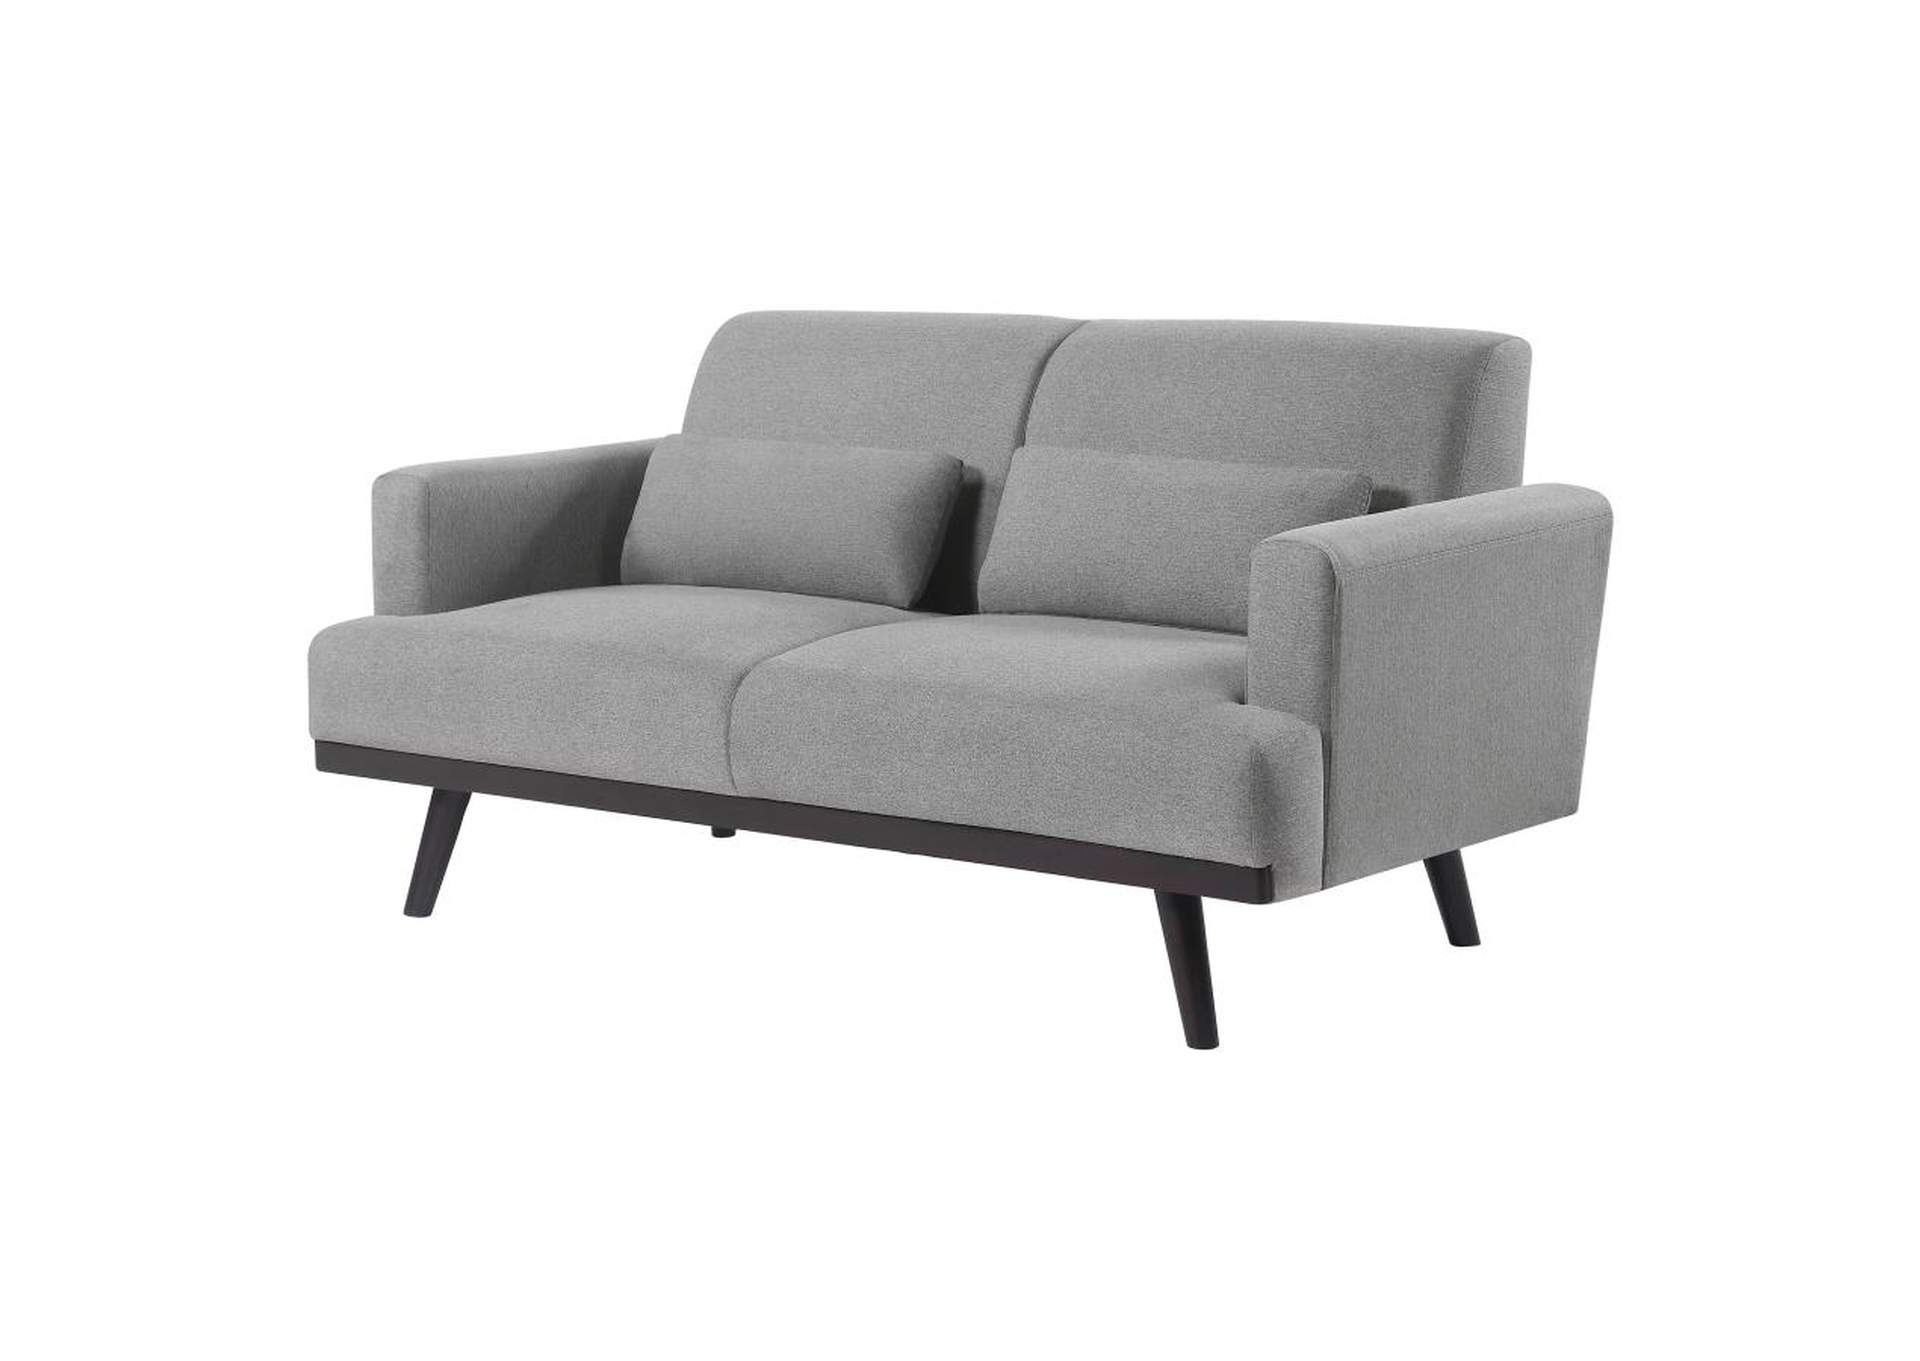 Blake Upholstered Loveseat with Track Arms Sharkskin and Dark Brown,Coaster Furniture